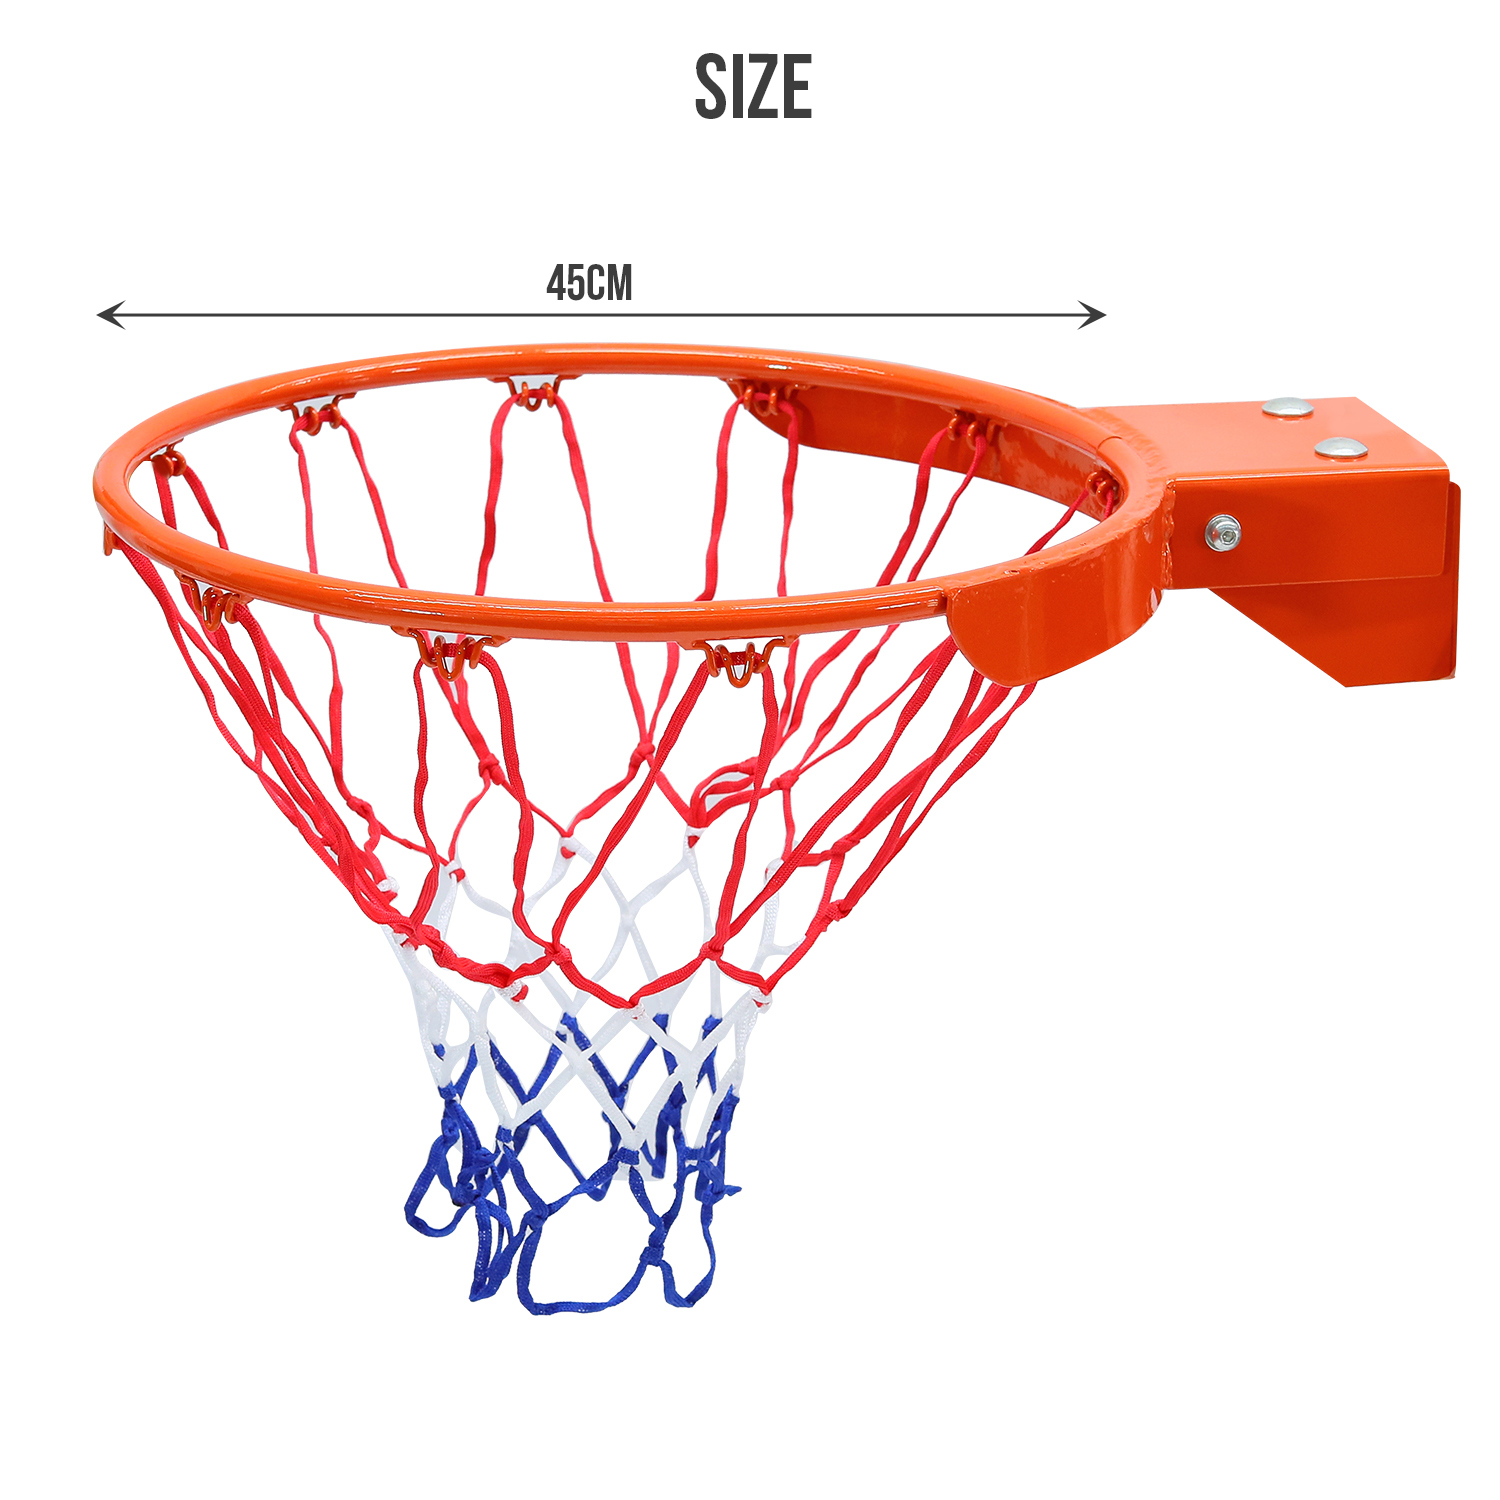 BASKETBALL RING METAL Hand Made WITH NET FOR KIDS MEDIUM 8.25